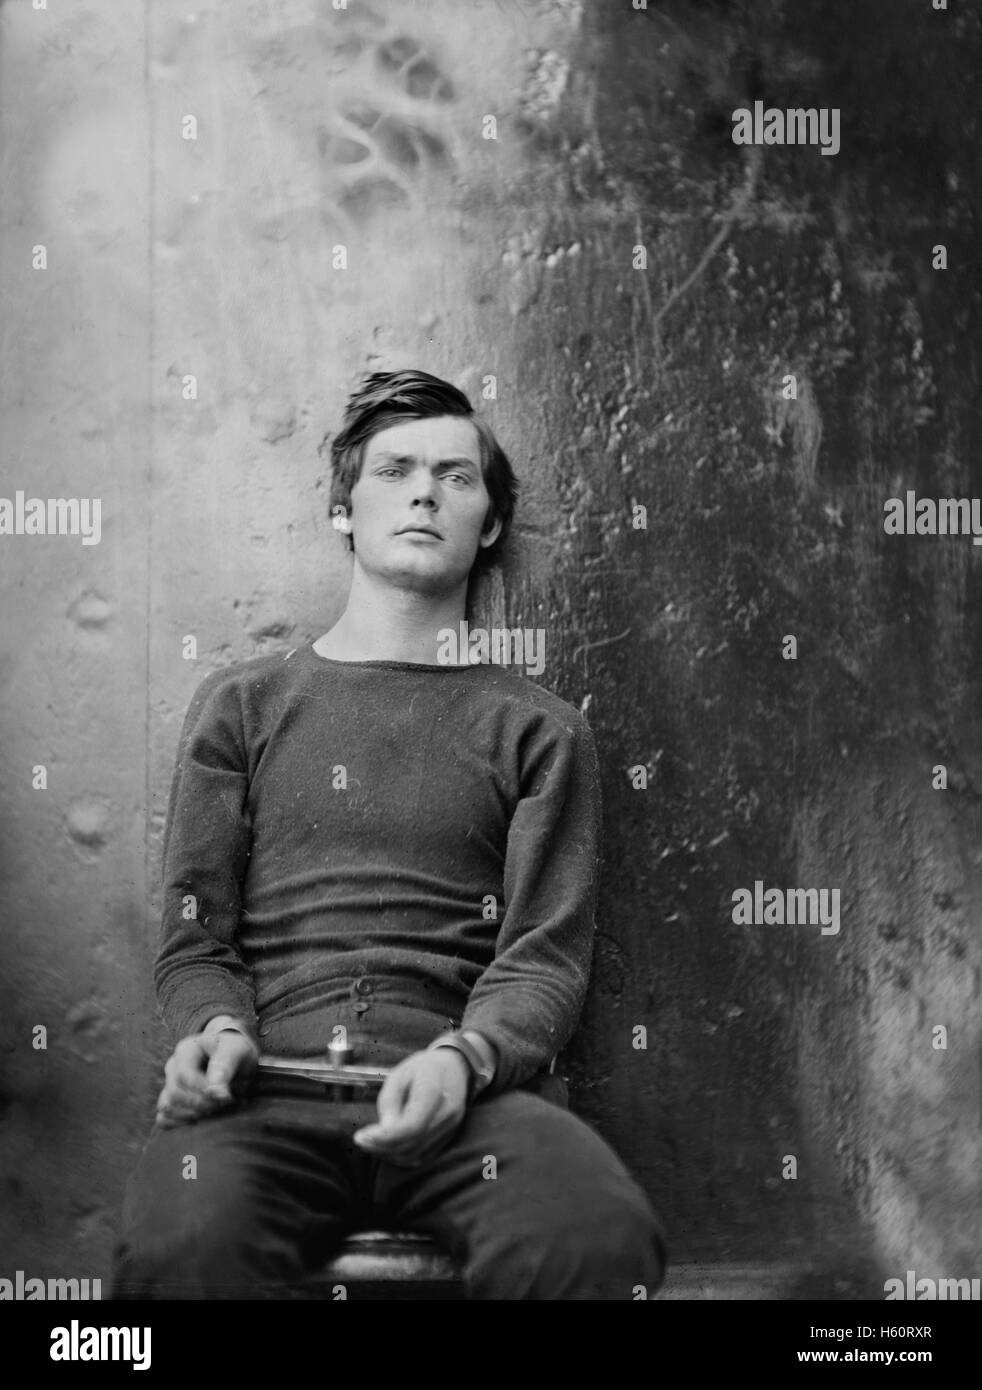 Lewis Powell, also known as Lewis Payne, Attacker of U.S. Secretary of State William H. Seward, and Conspirator in Assassination of U.S. President Abraham Lincoln, Seated and Manacled, Washington Navy Yard, Washington DC, USA, by Alexander Gardner, April 1865 Stock Photo